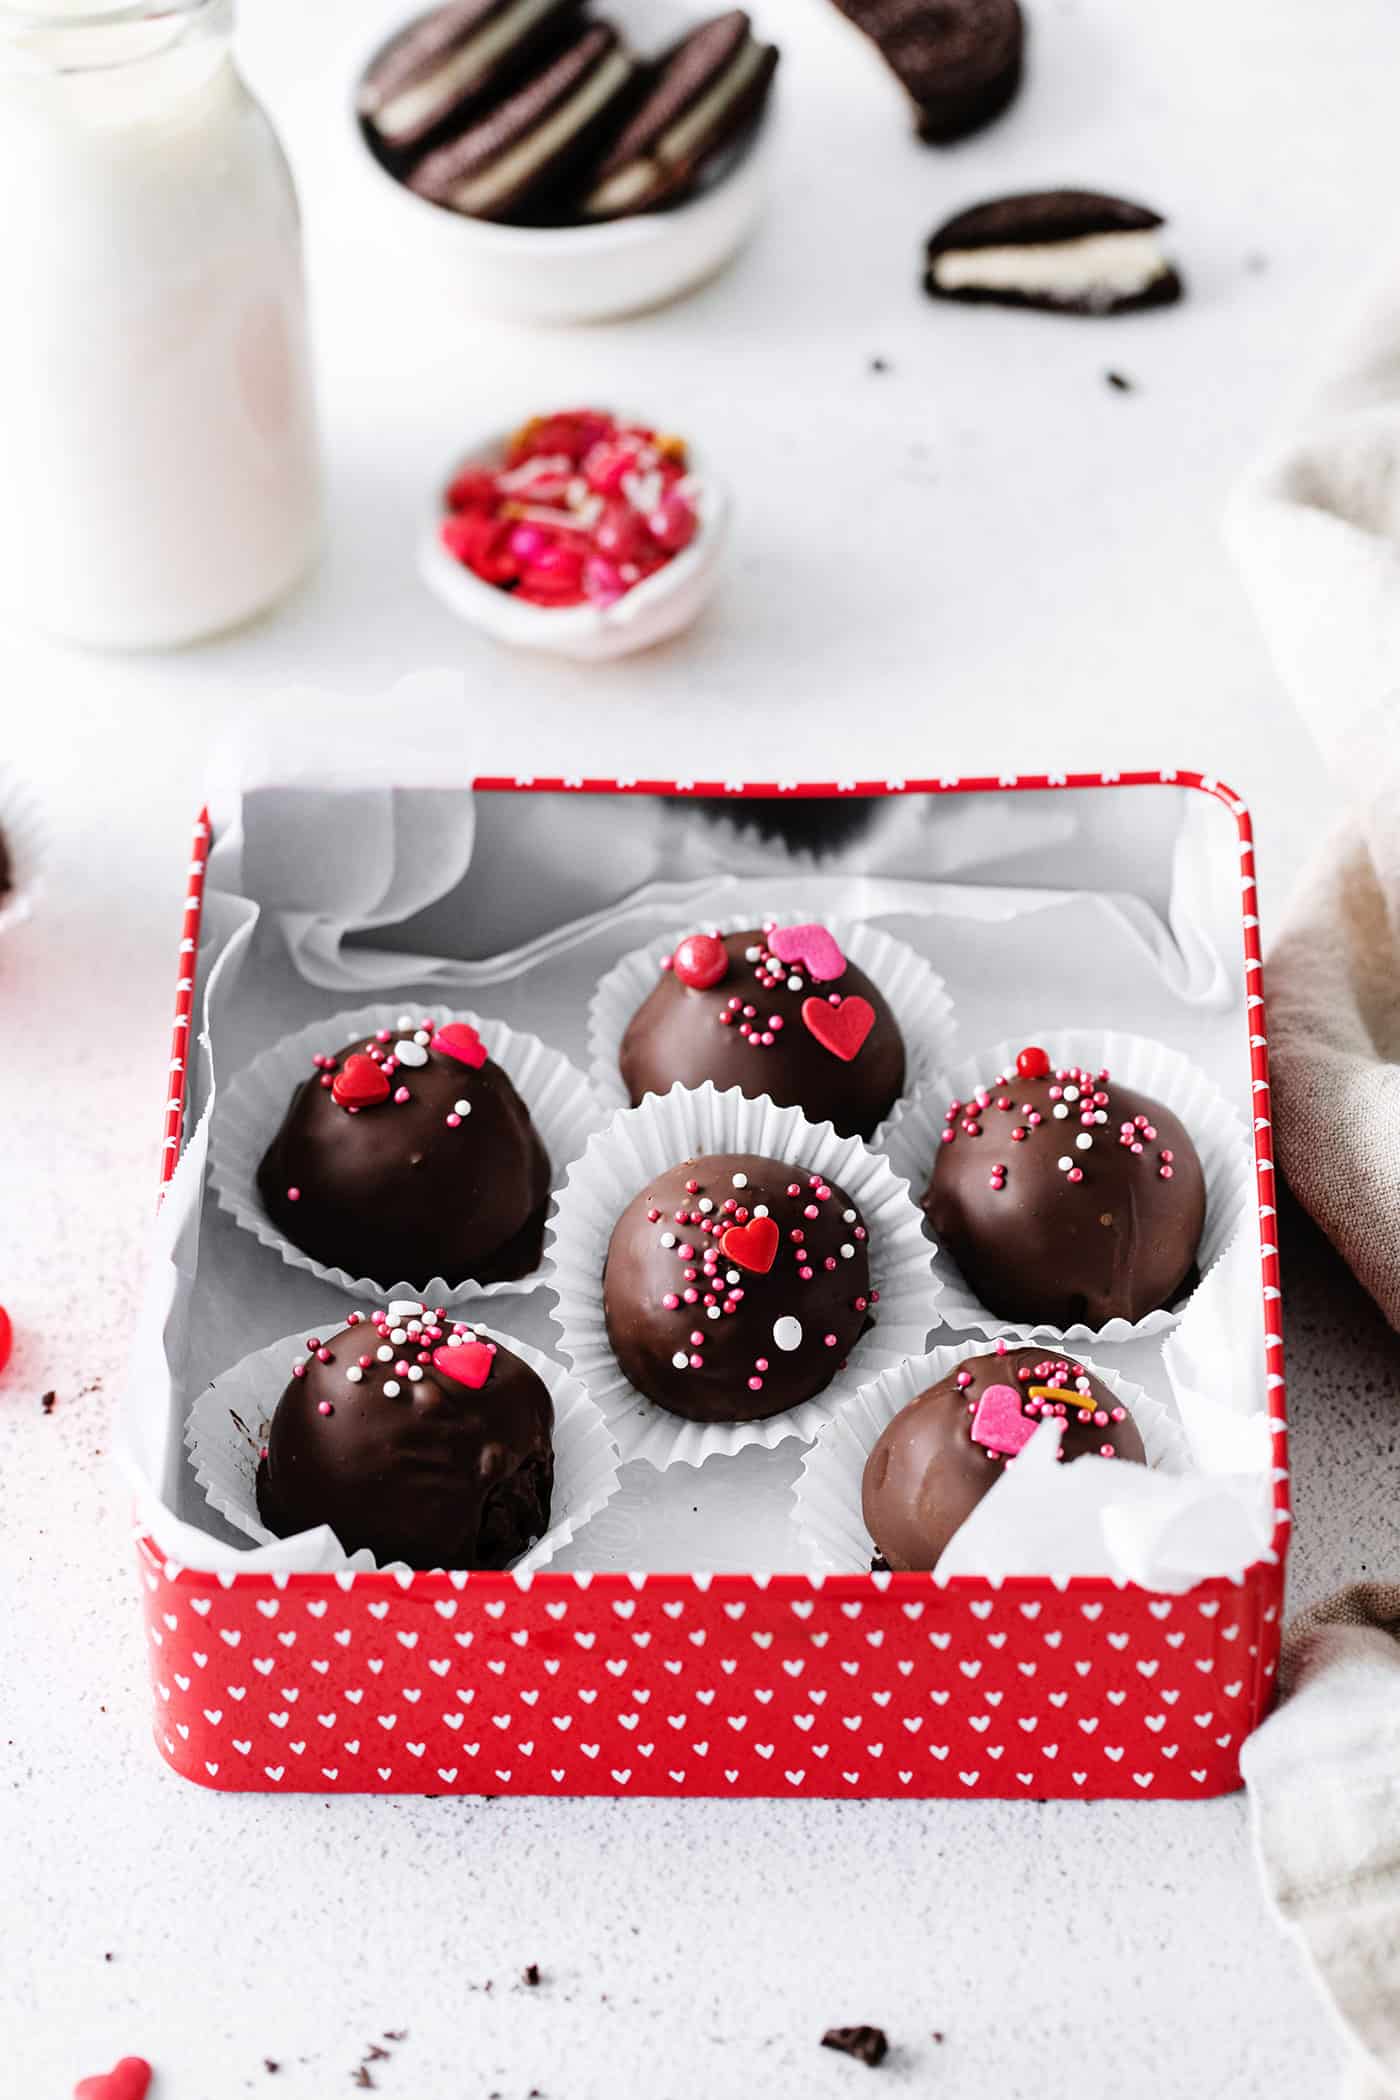 Oreo truffles with sprinkles in a square red box